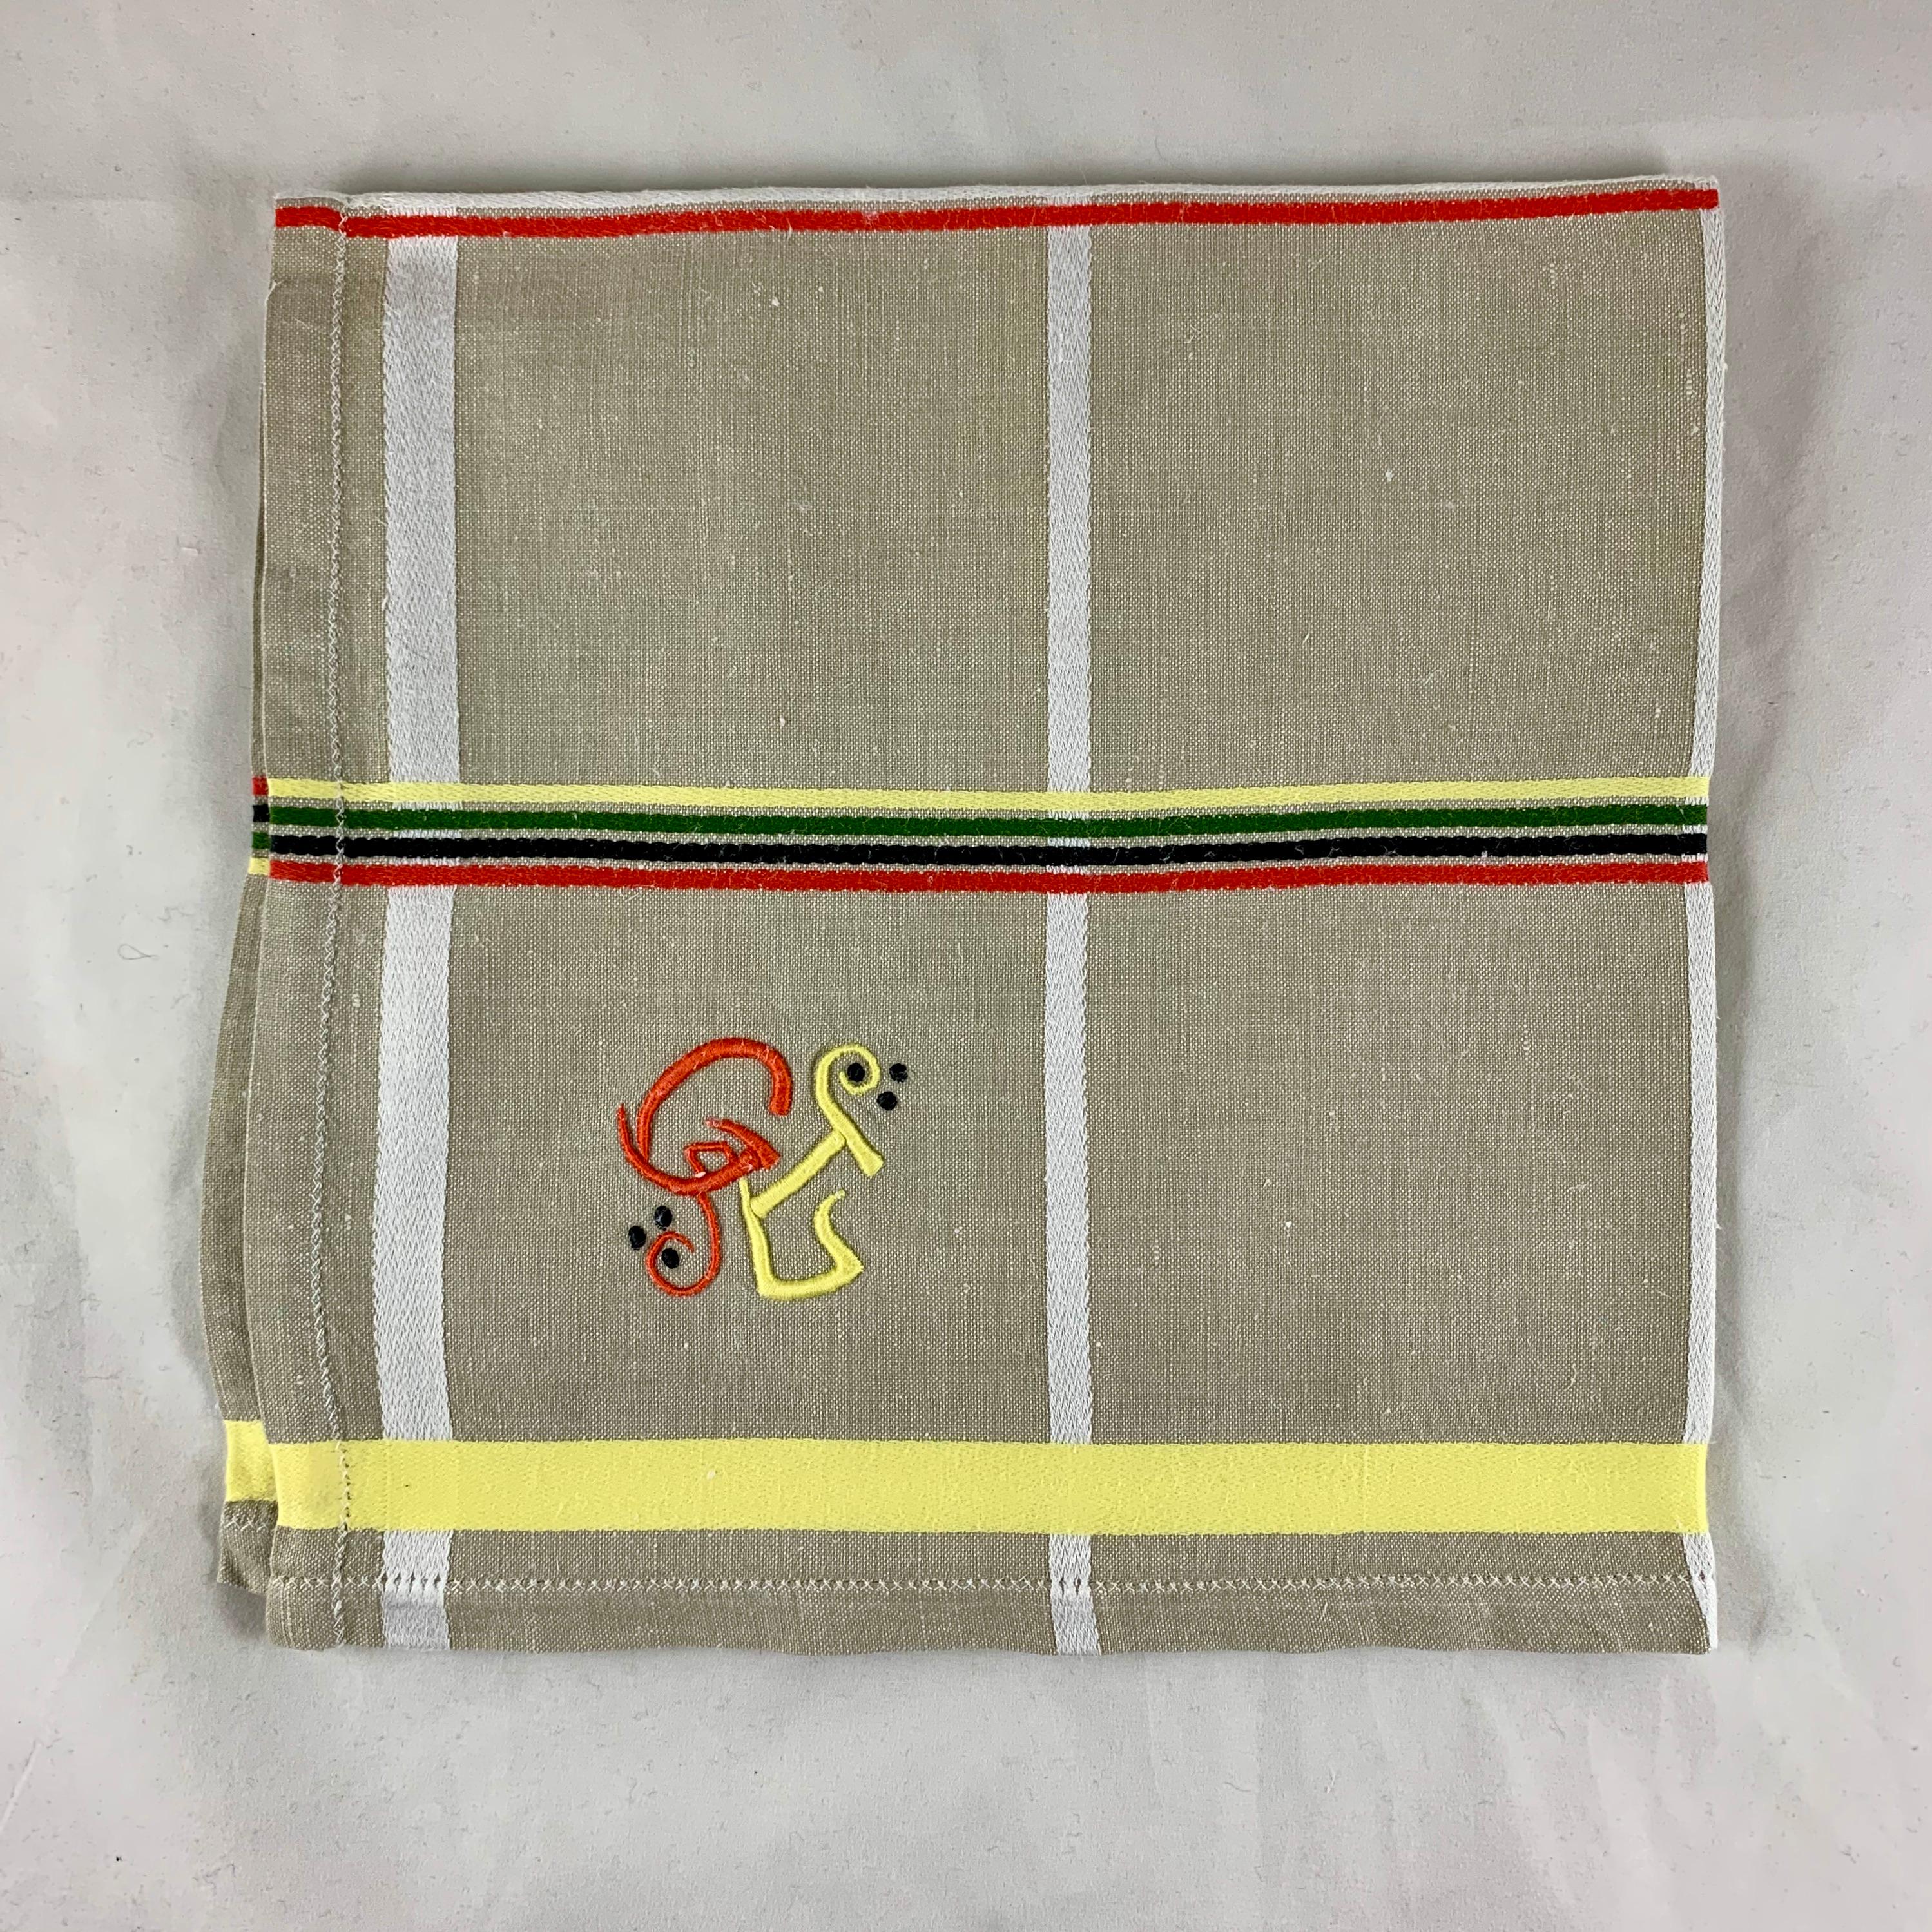 A set of twelve French Provençal linen serviettes with a bold embroidered monogram, circa mid-late 1920s.

The French linen napkins have a plaid design dating from the Art Deco era. Each serviette has a monogram with the initials G L embroidered